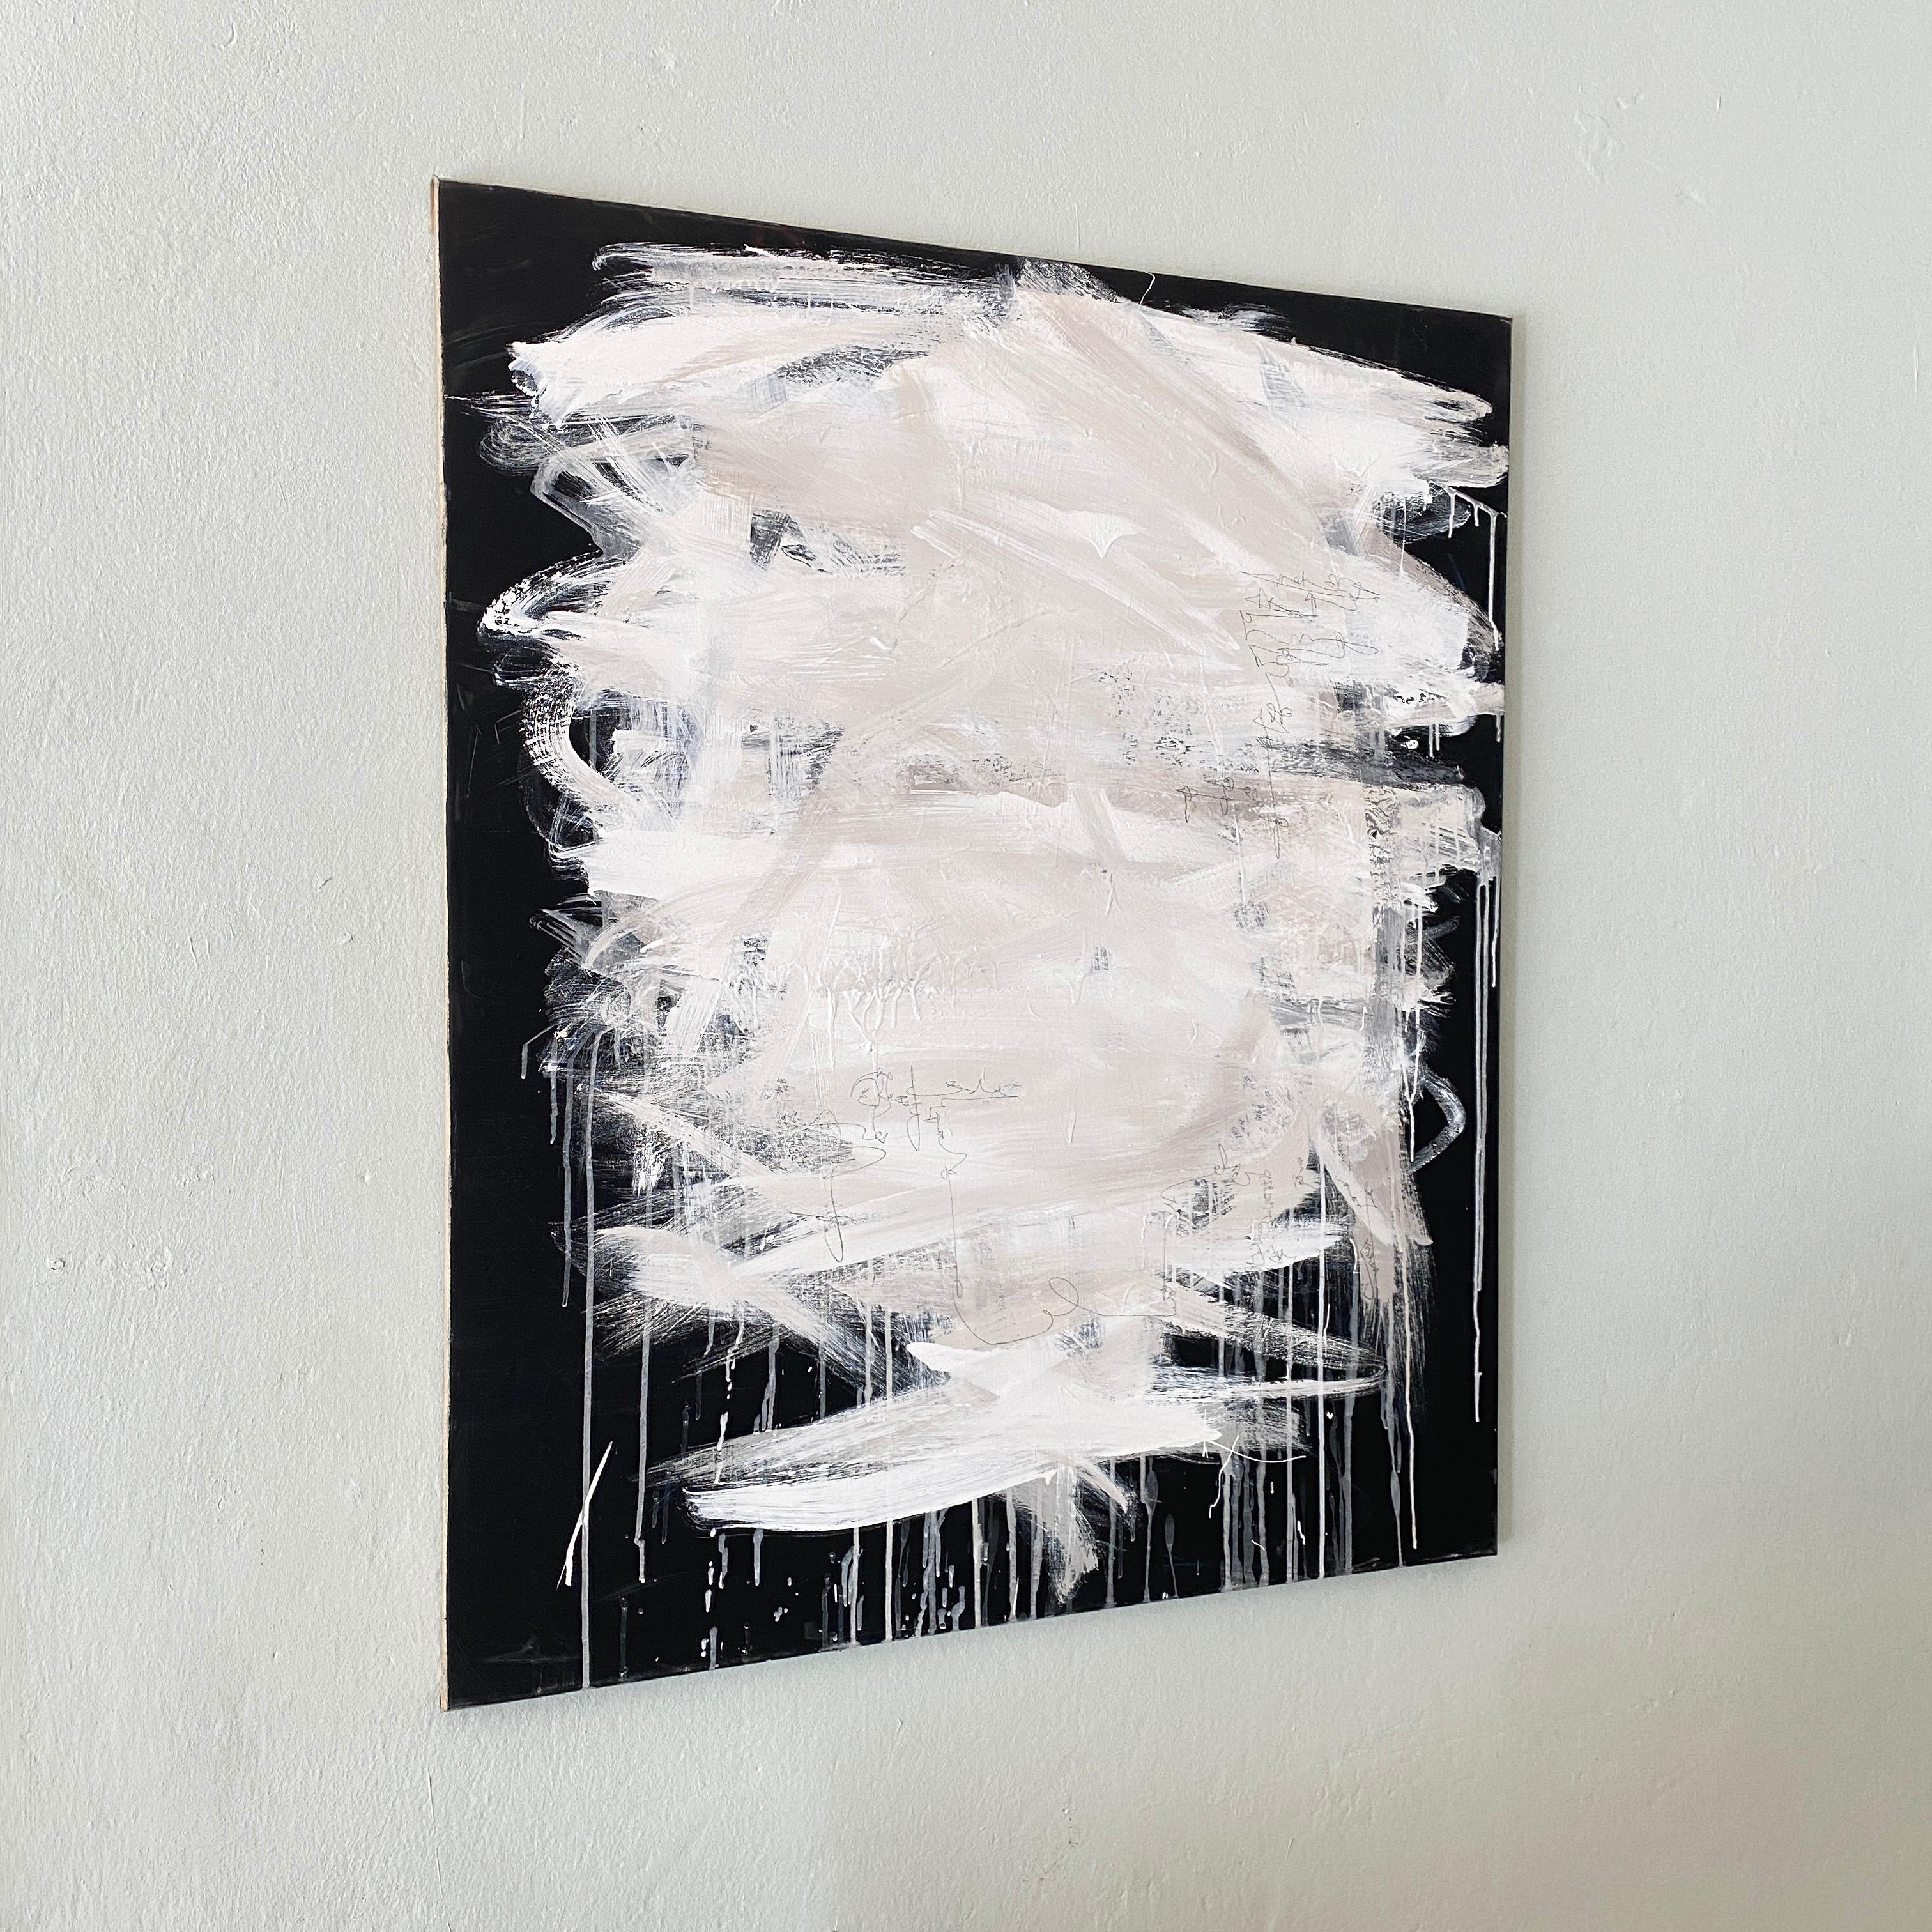 German Contemporary Modern Abstract White and Black Acrylic Painting on Canvas